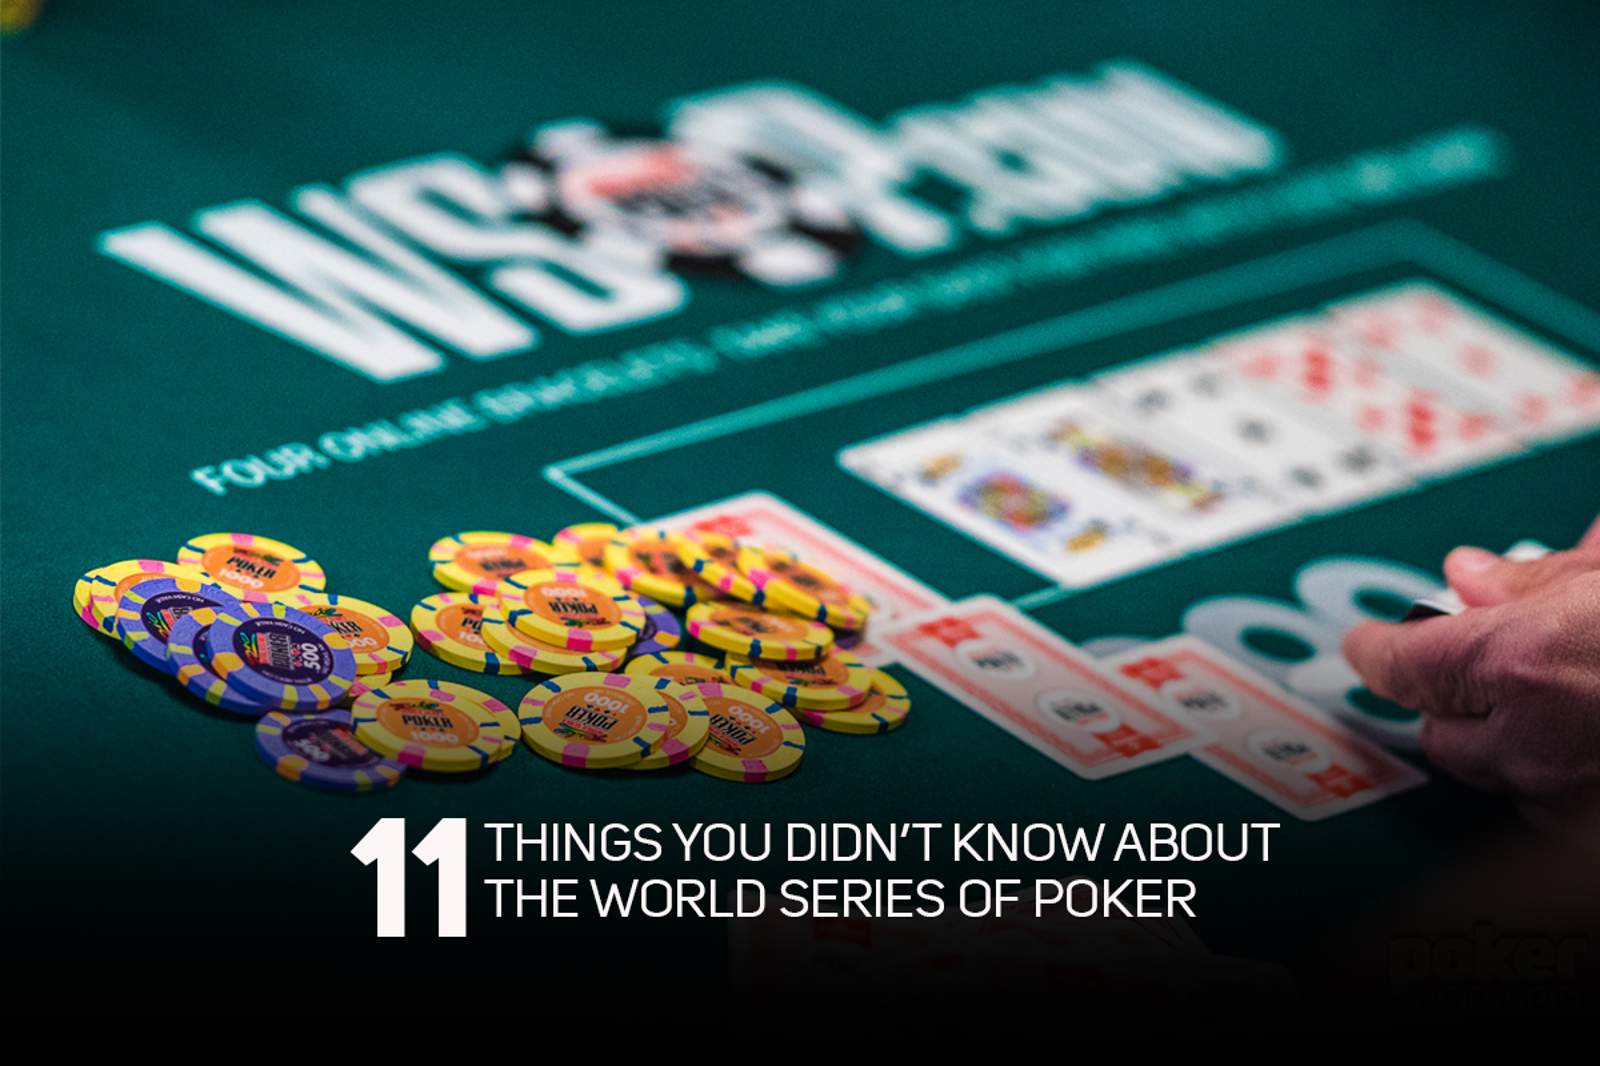 11 Things You Didn't Know About the 2019 World Series of Poker!